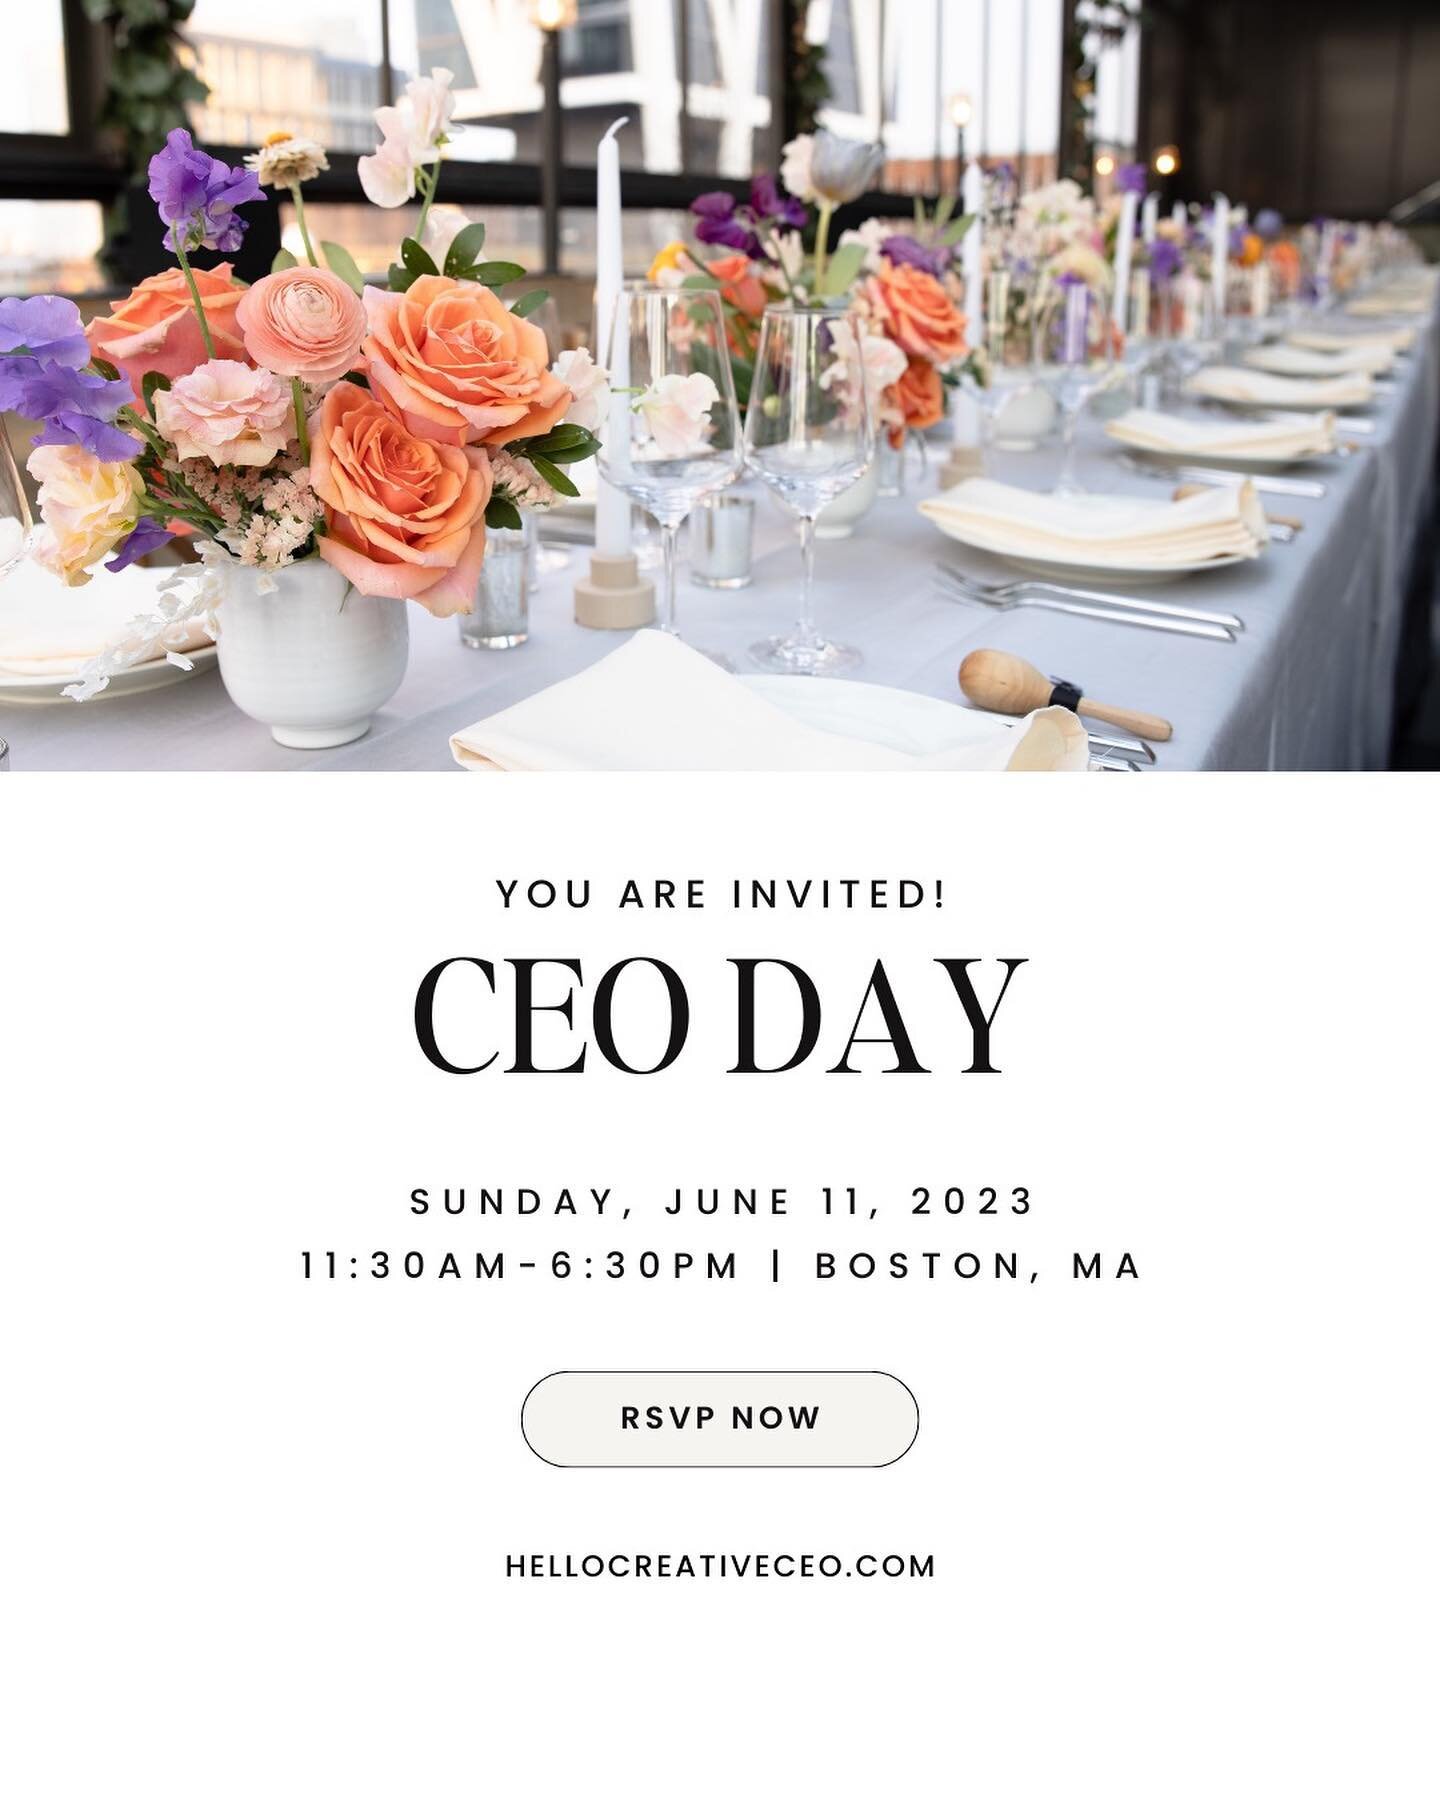 Creative CEO, You are Invited!

Join us for our quarterly gathering in Boston for the CEO Day hosted at an oceanfront mansion on June 11th.

Step into your next launch feeling confident, focused, and limitless.&nbsp;

CEO Day is an intimate group exp